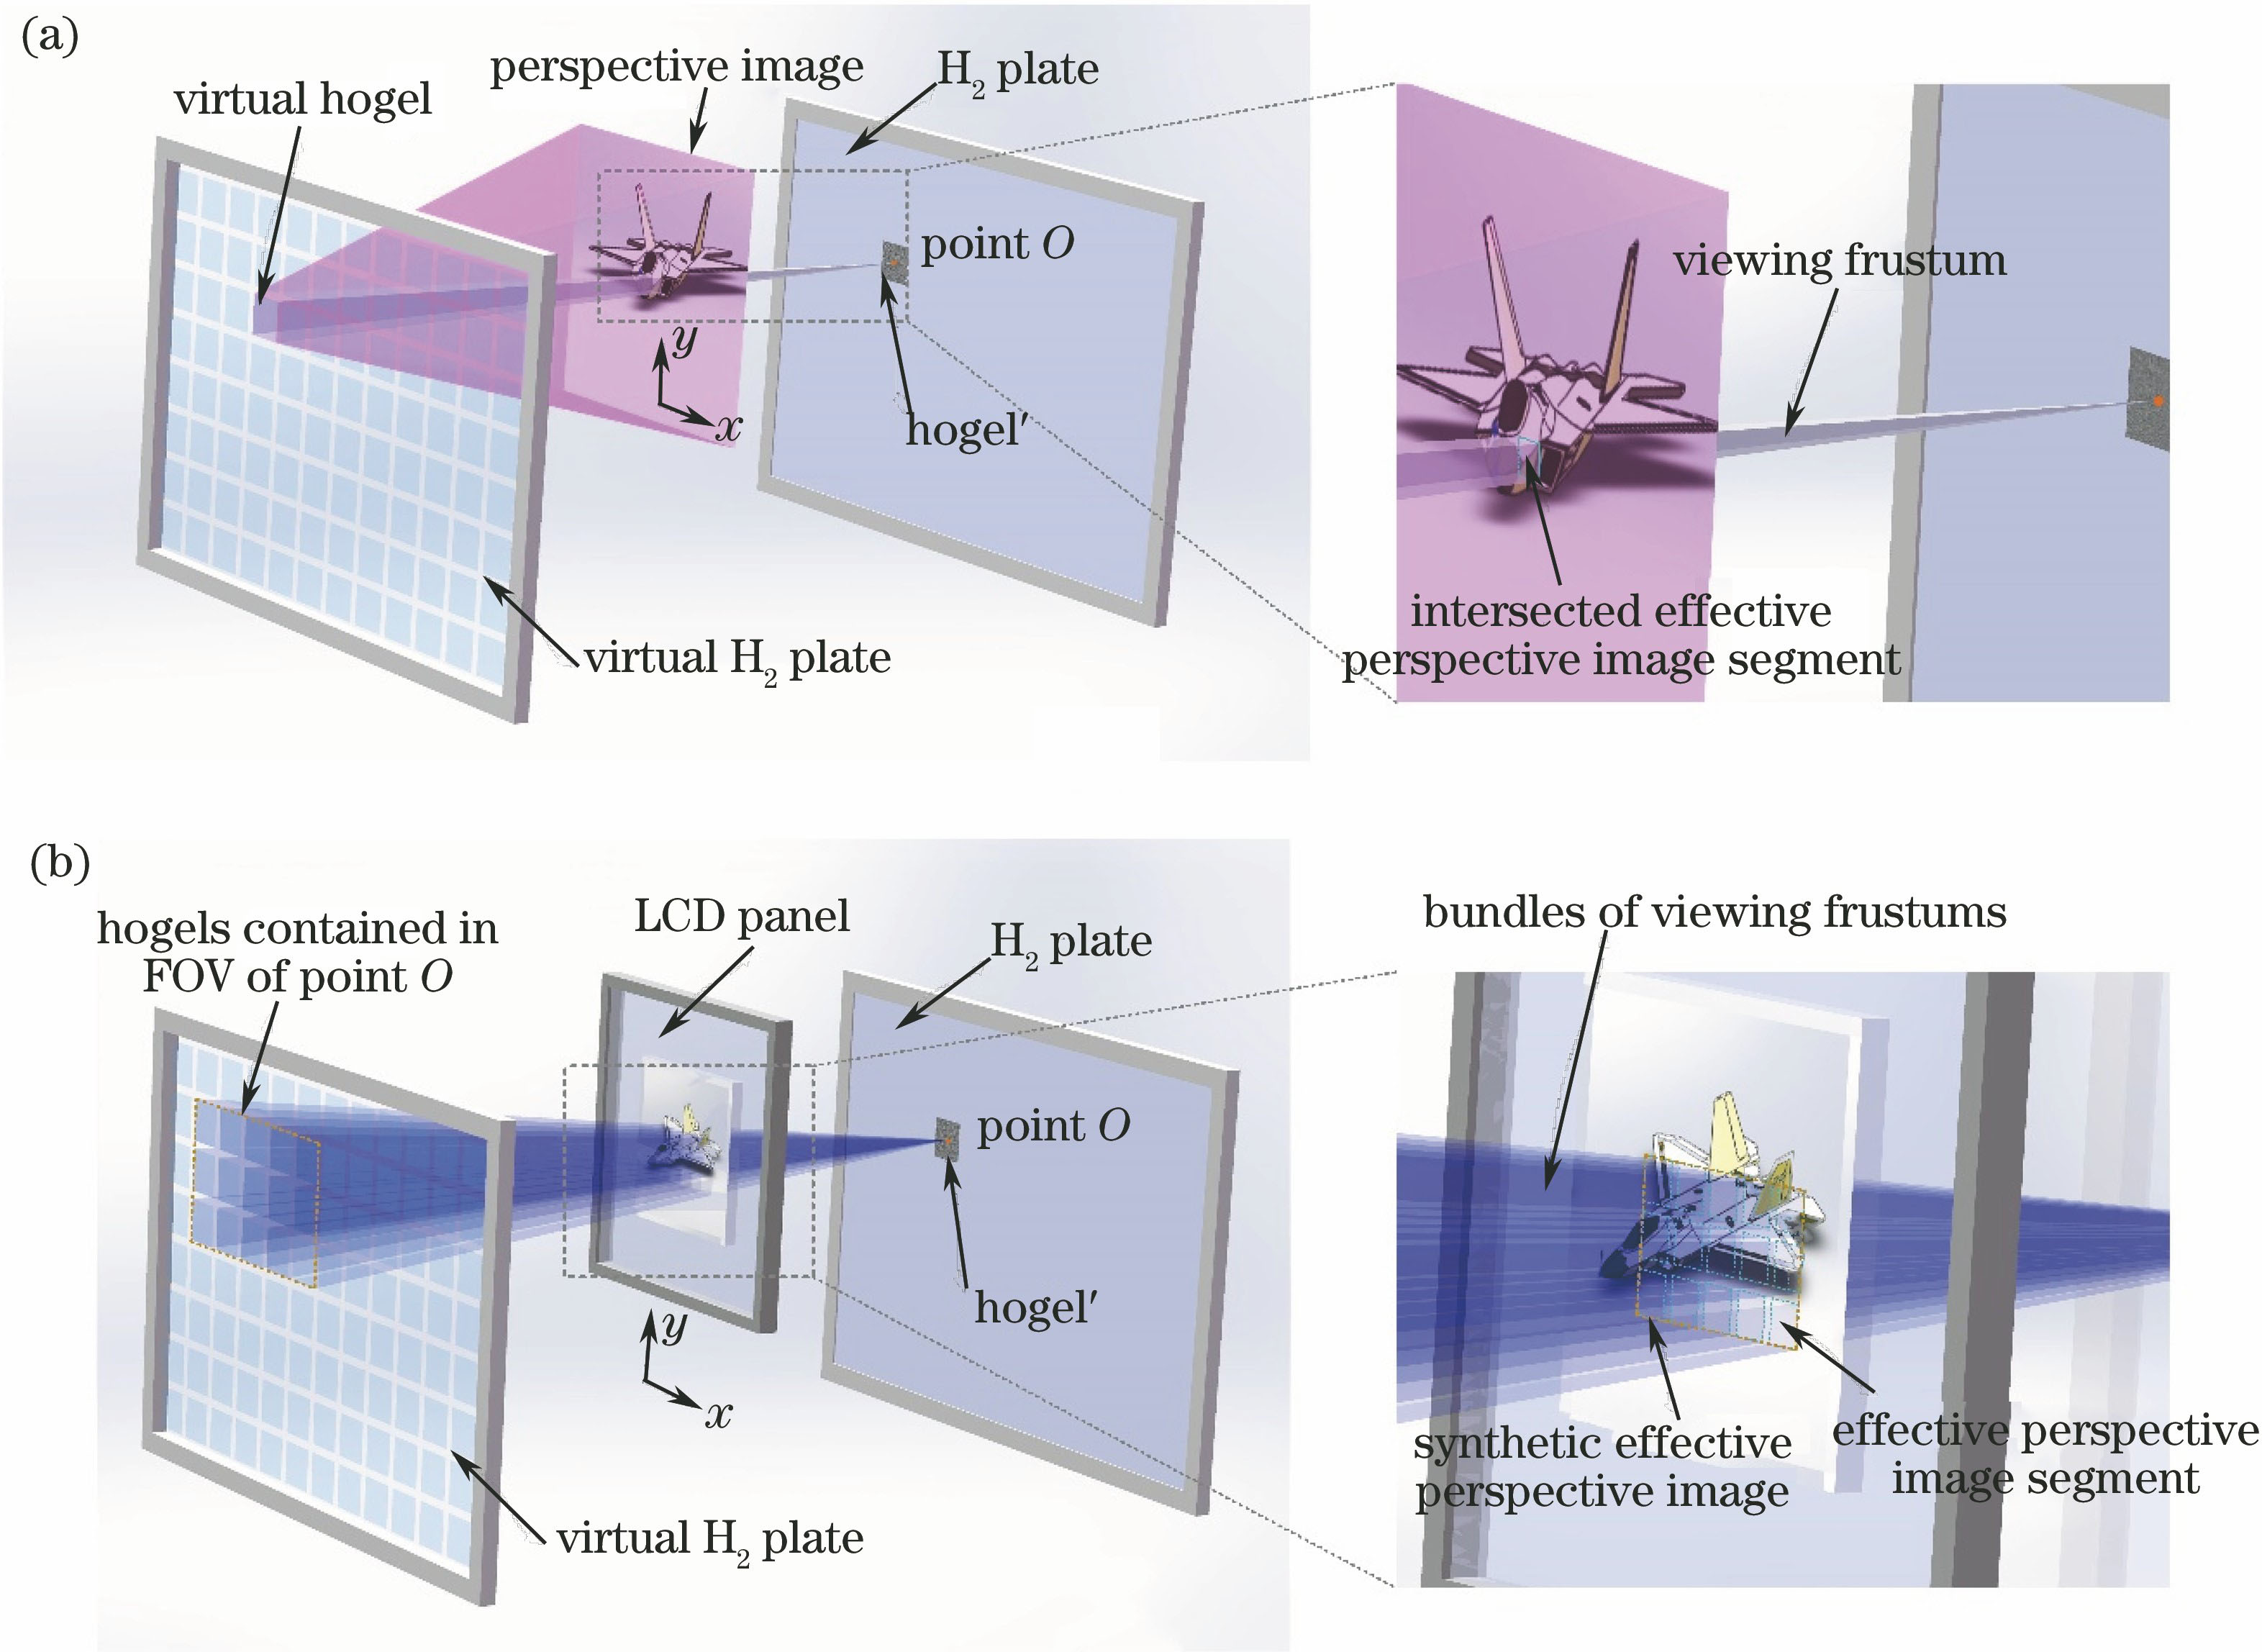 General principle diagram of EPISM method. (a) Acquisition of effective perspective image segment; (b) splicing and combination of effective perspective image from multiple virtual holographic hogel